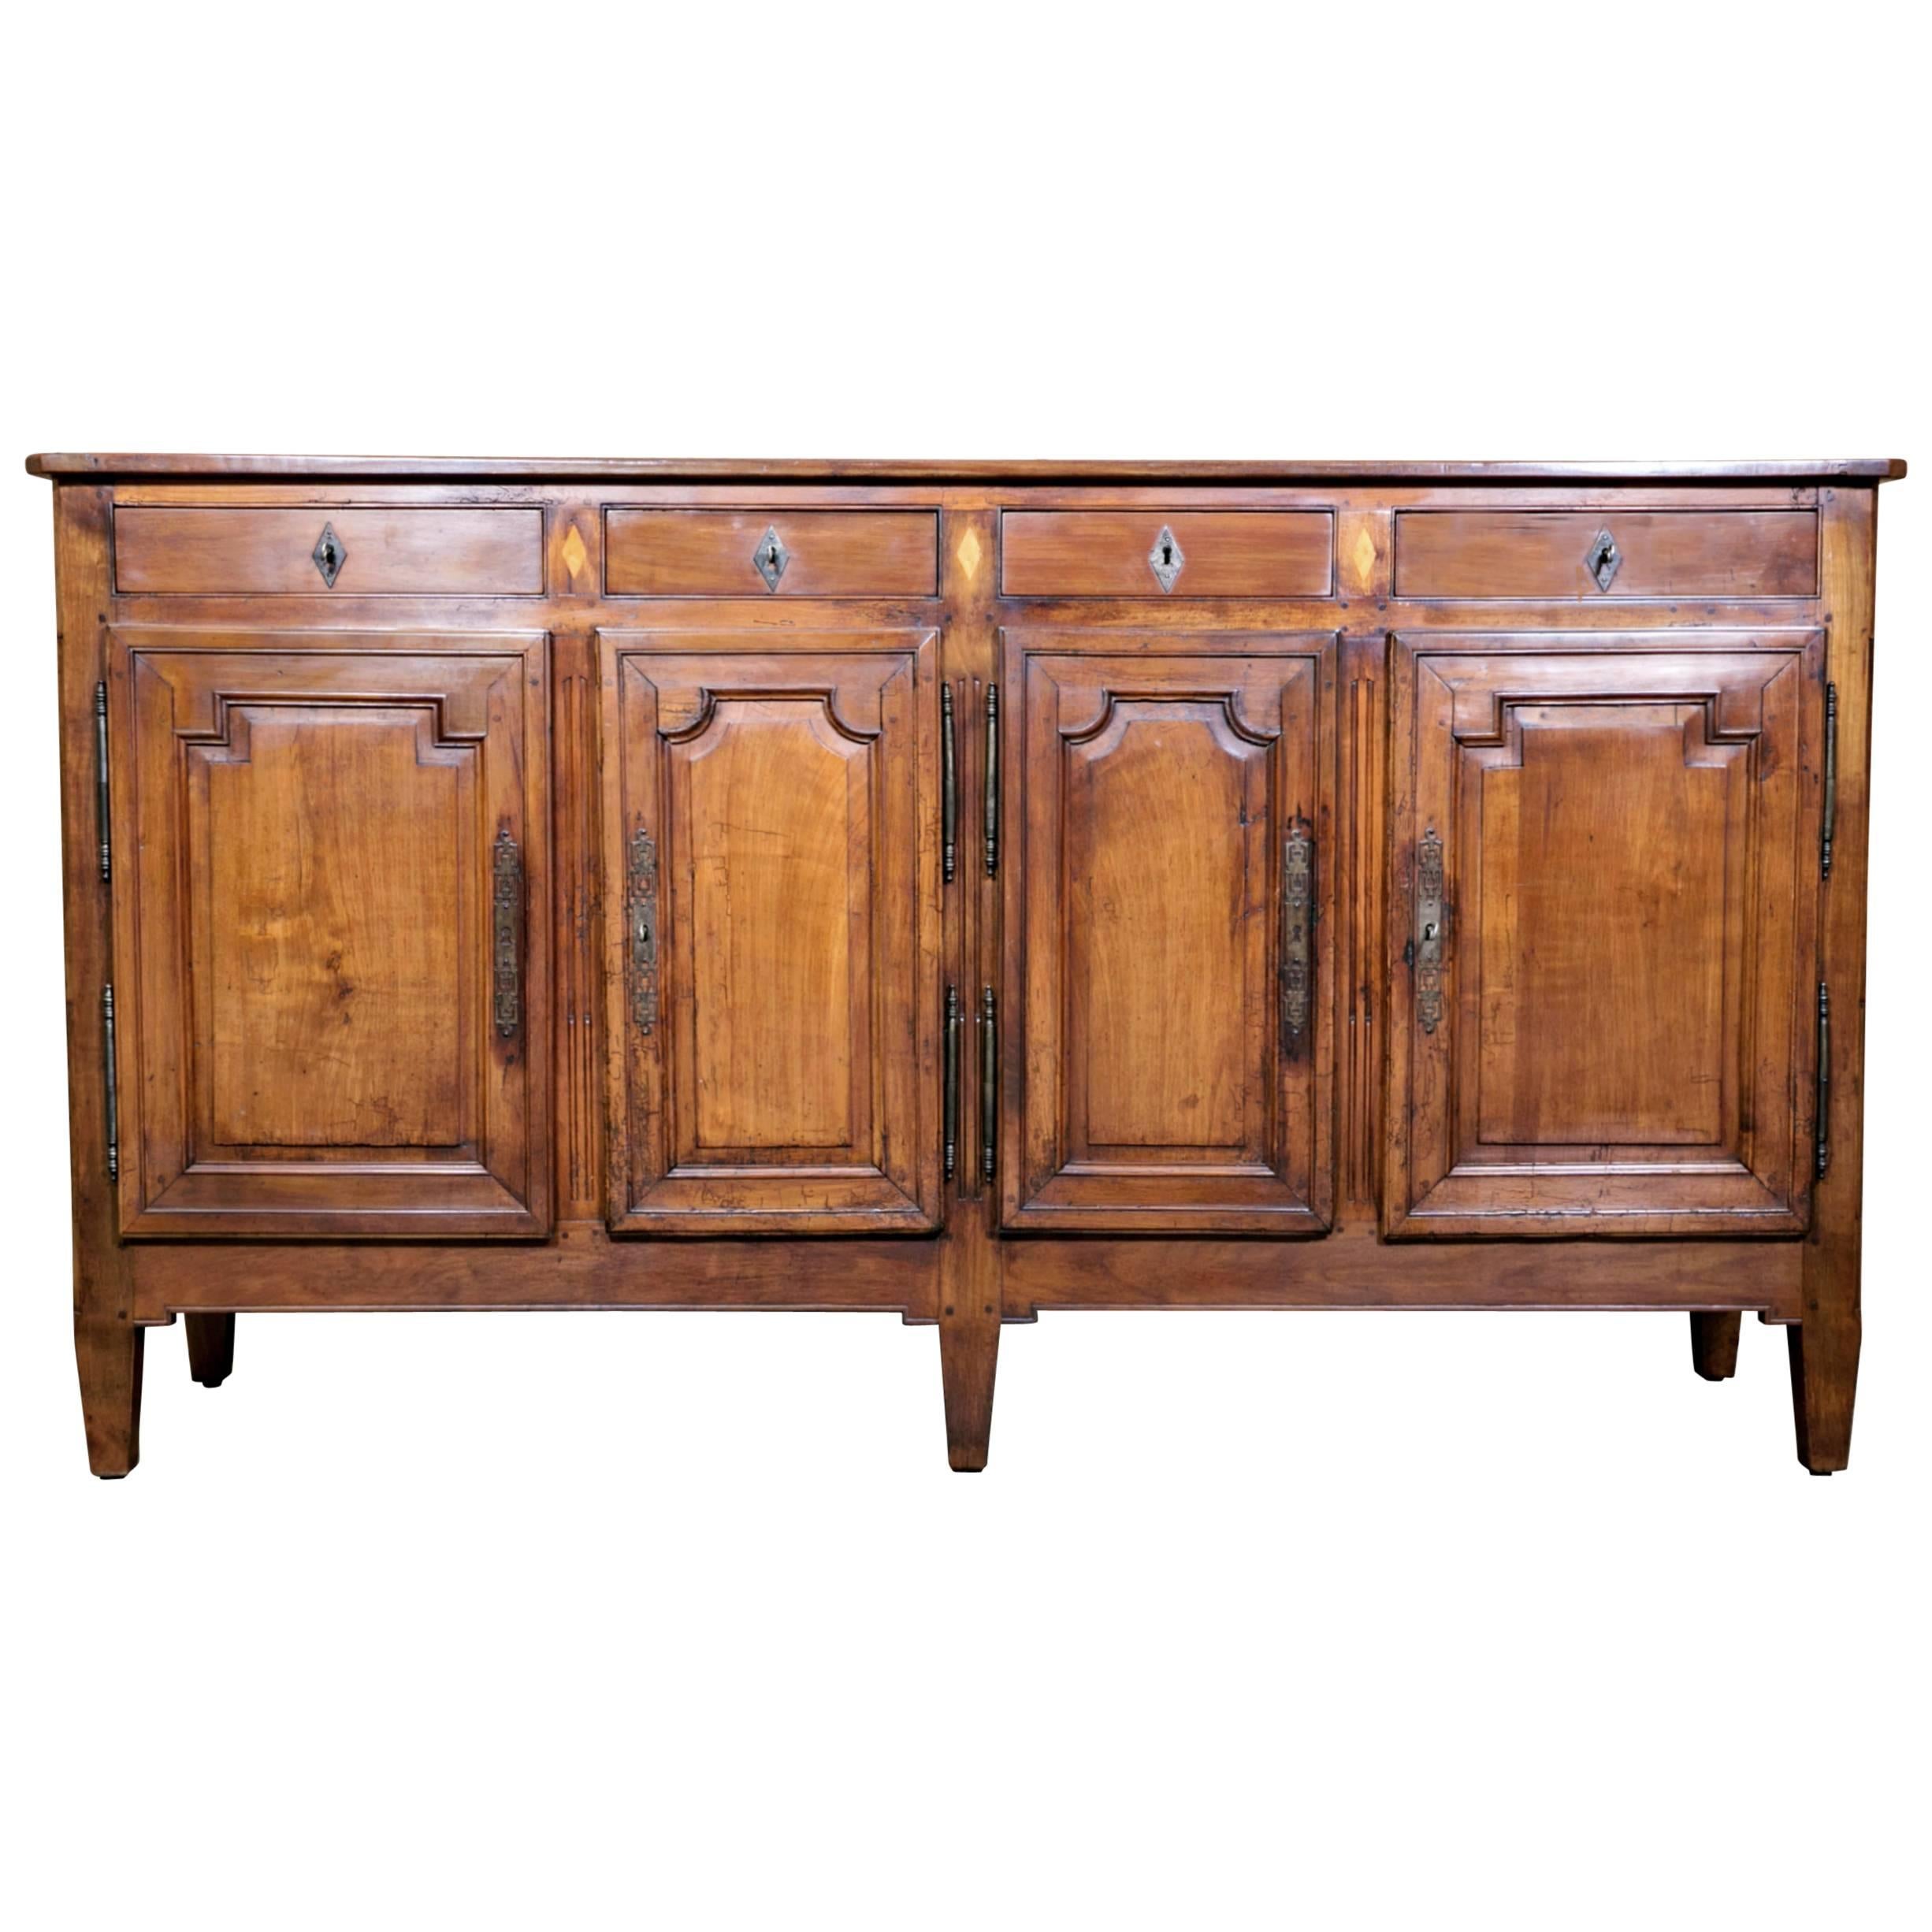 French Louis XVI Style Cherrywood and Fruitwood Inlaid Enfilade Buffet